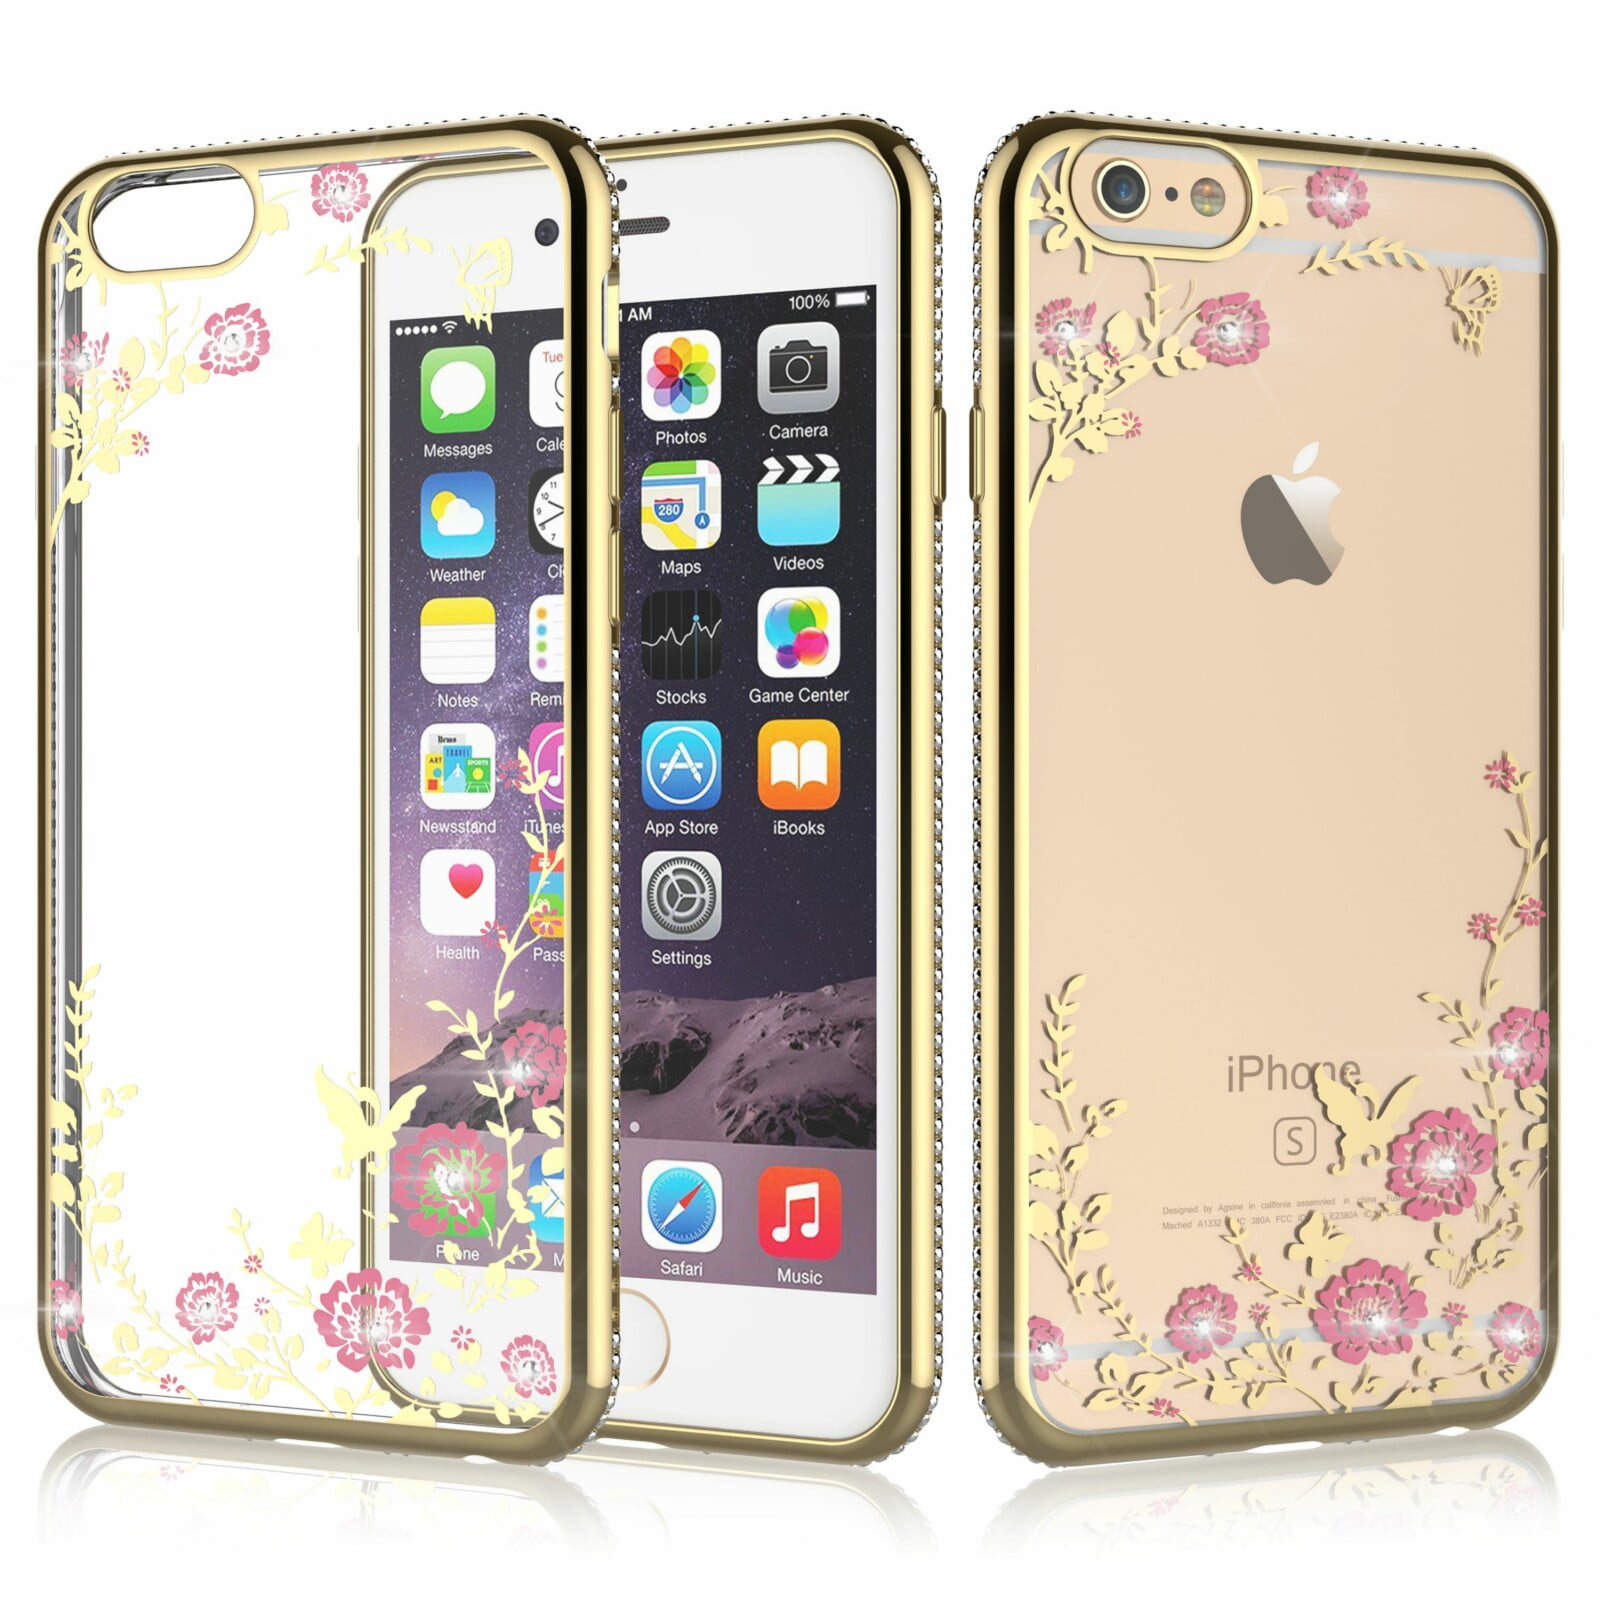 Iphone 6 Plus Case Iphone 6s Plus Cover Tekcoo Tflower Ultra Thin Tpu Soft Case Bling Diamond Rhinestone Clear Panel Cover For Apple Iphone 6 Plus Iphone 6s Plus 5 5 Rose